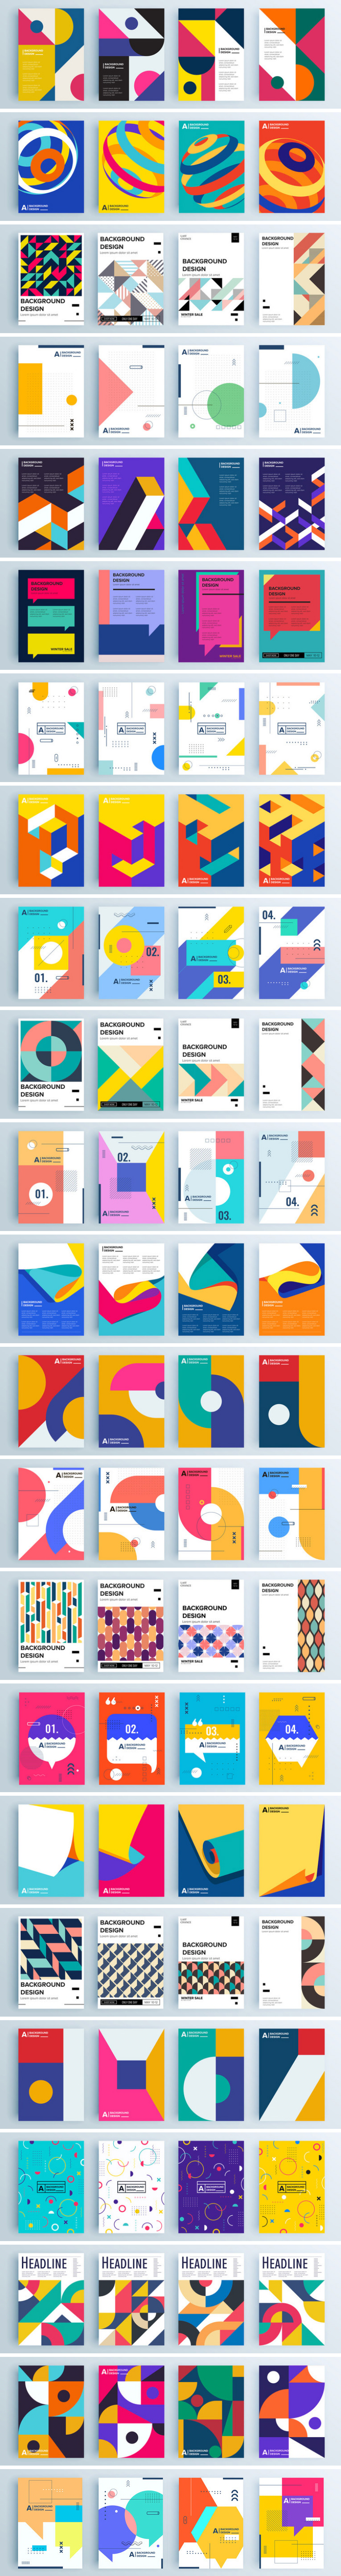 Geometric graphic design templates available for download as fully editable vector shapes.